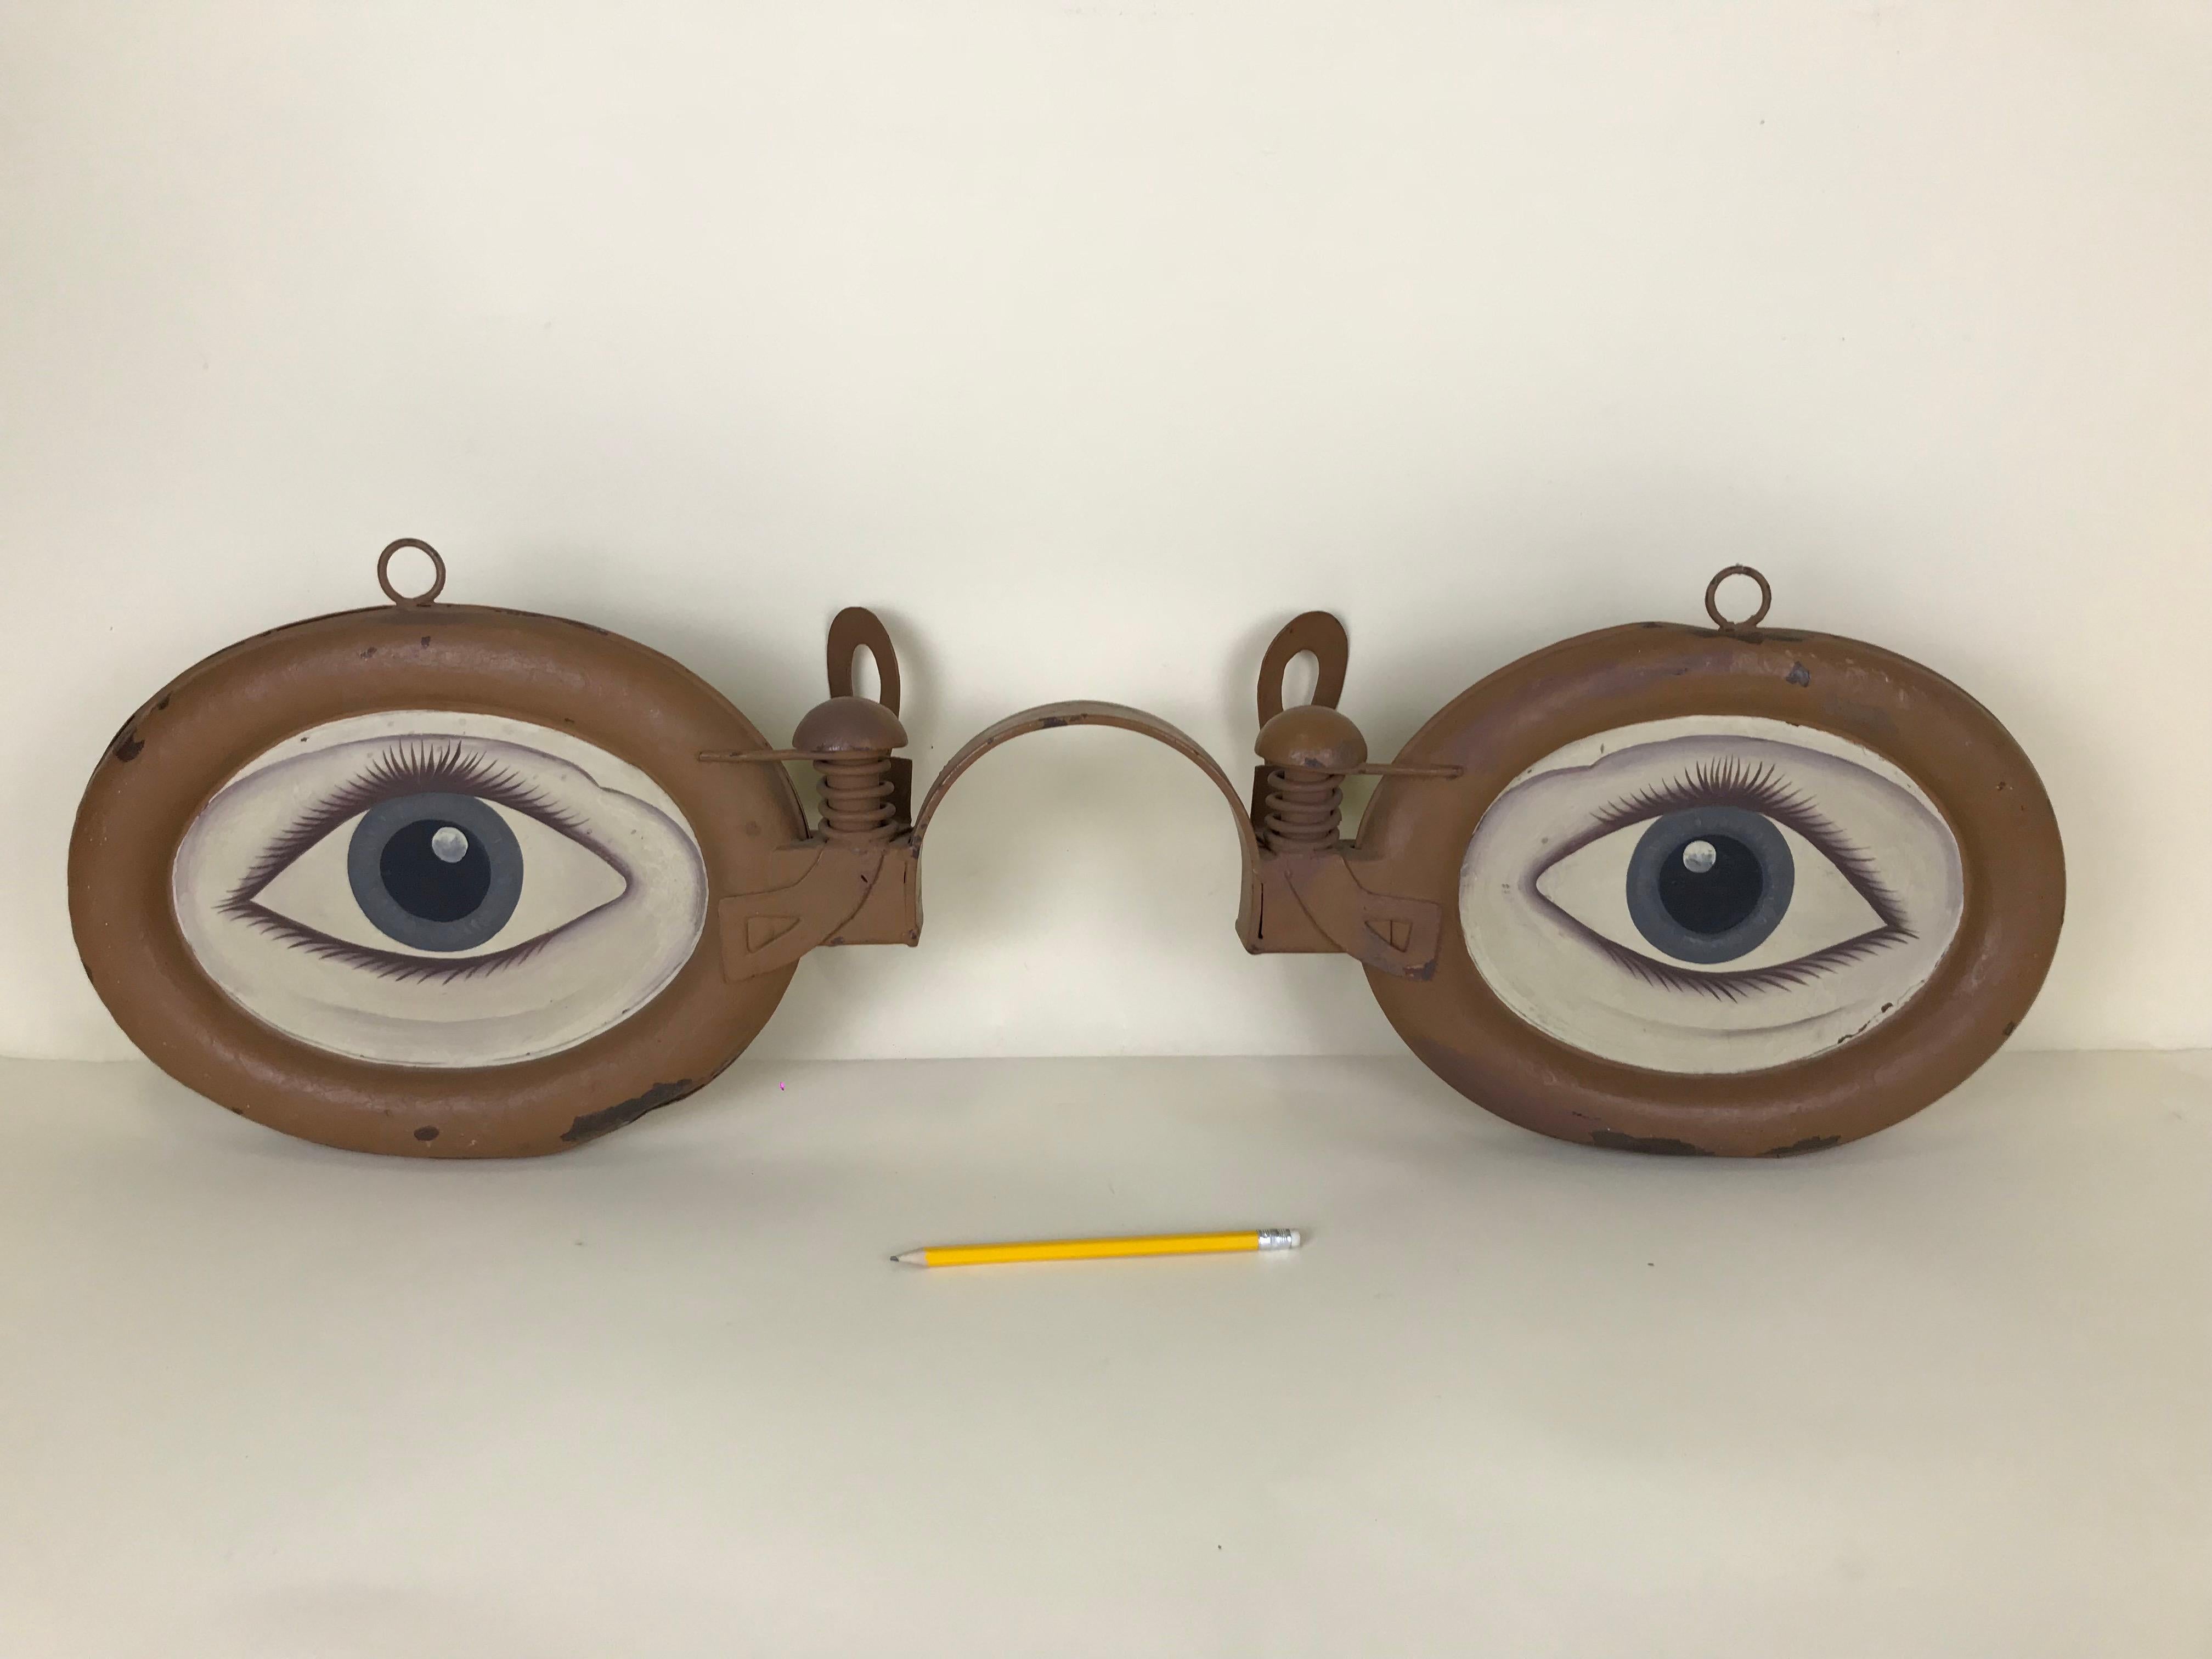 1920s Italian vintage metal double-sided optical shop sign in painted iron sheet. This stunning folk art sign representing in detail an eyewear sculpture featuring also painting of eyes on both sides. 

Dimensions eyewear: 86 W x 26 H x 13 D